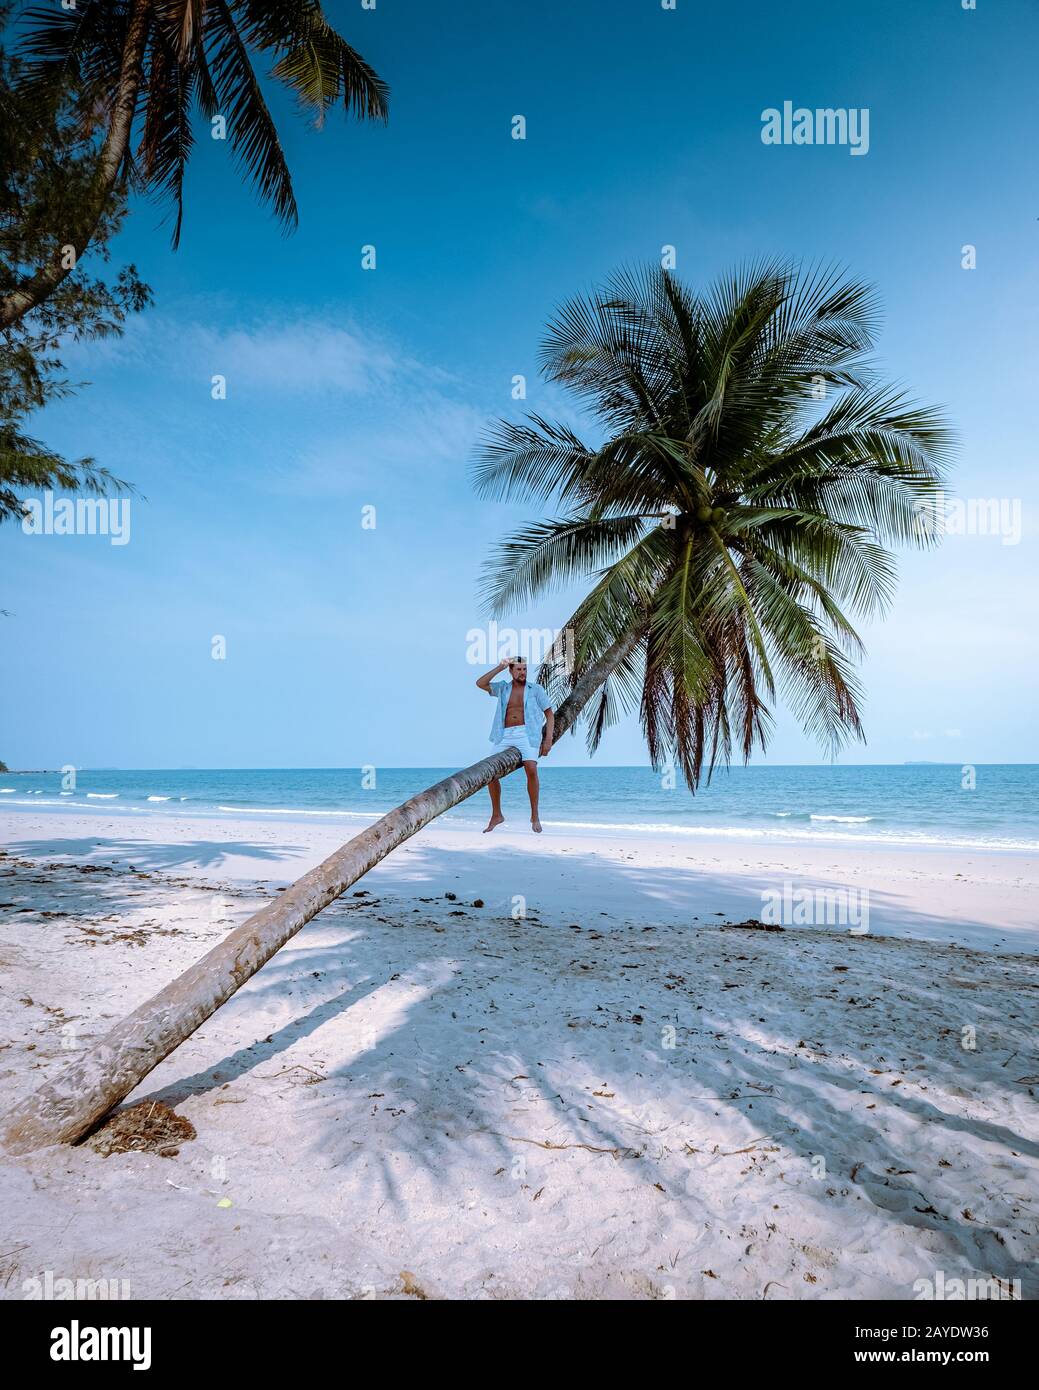 Wua Laen beach Chumphon area Thailand, palm tree hanging over the beach with guy on vacation in Thailand Asia Stock Photo